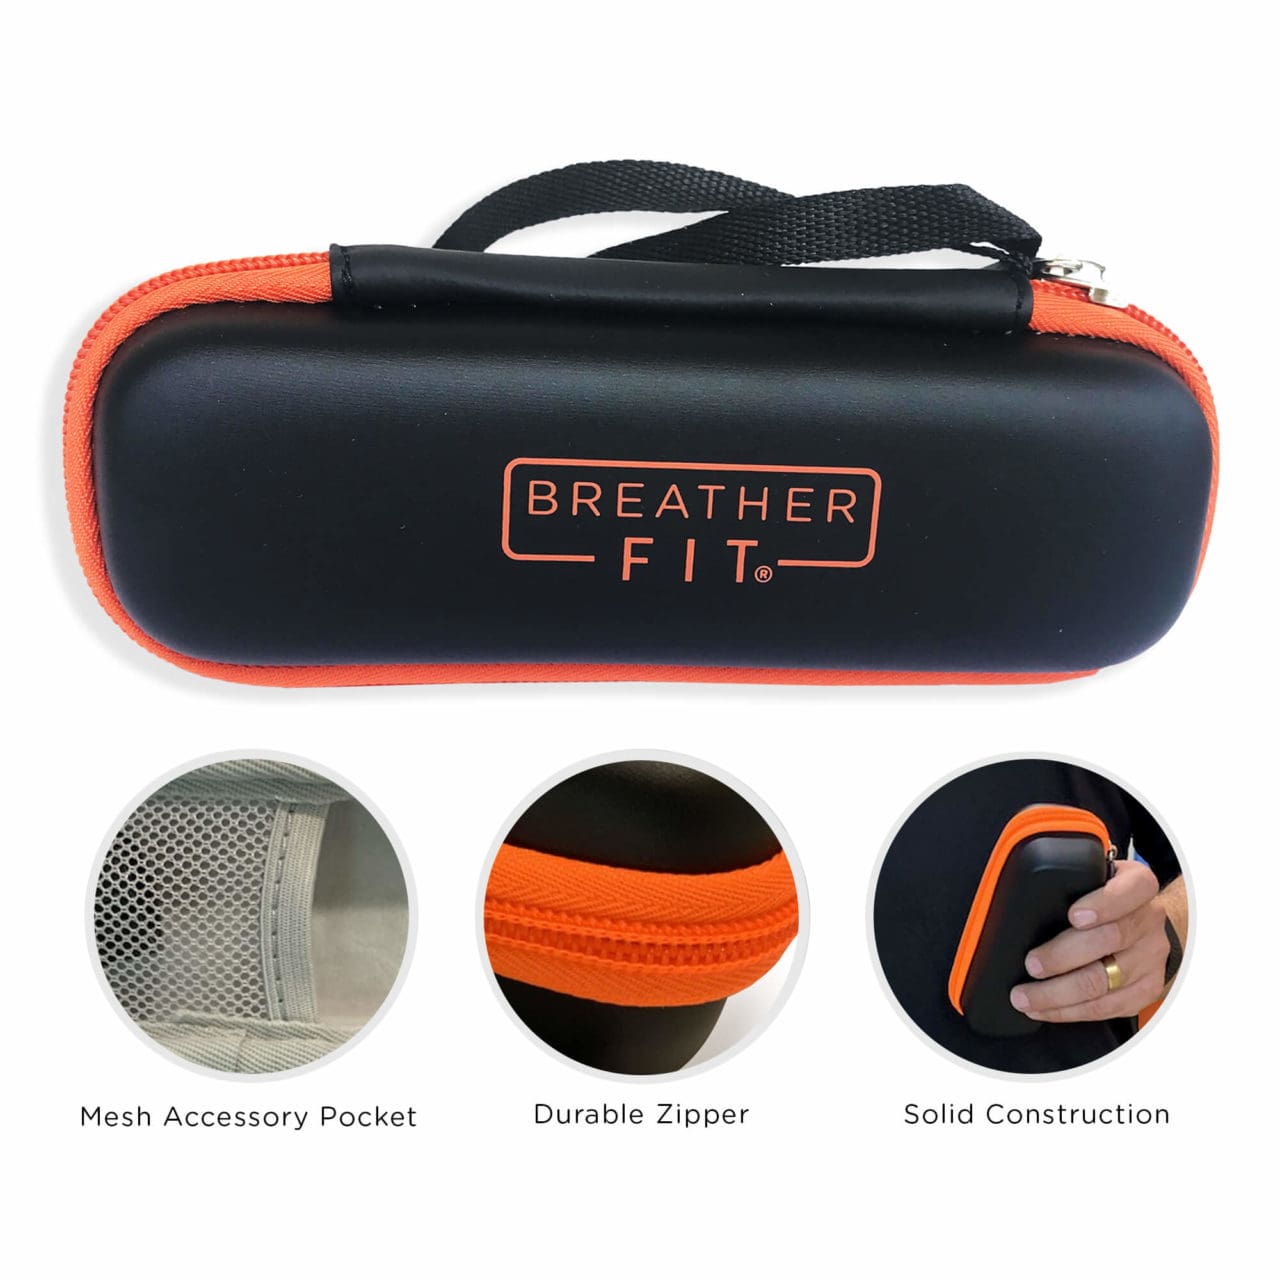 Breather Fit case features.